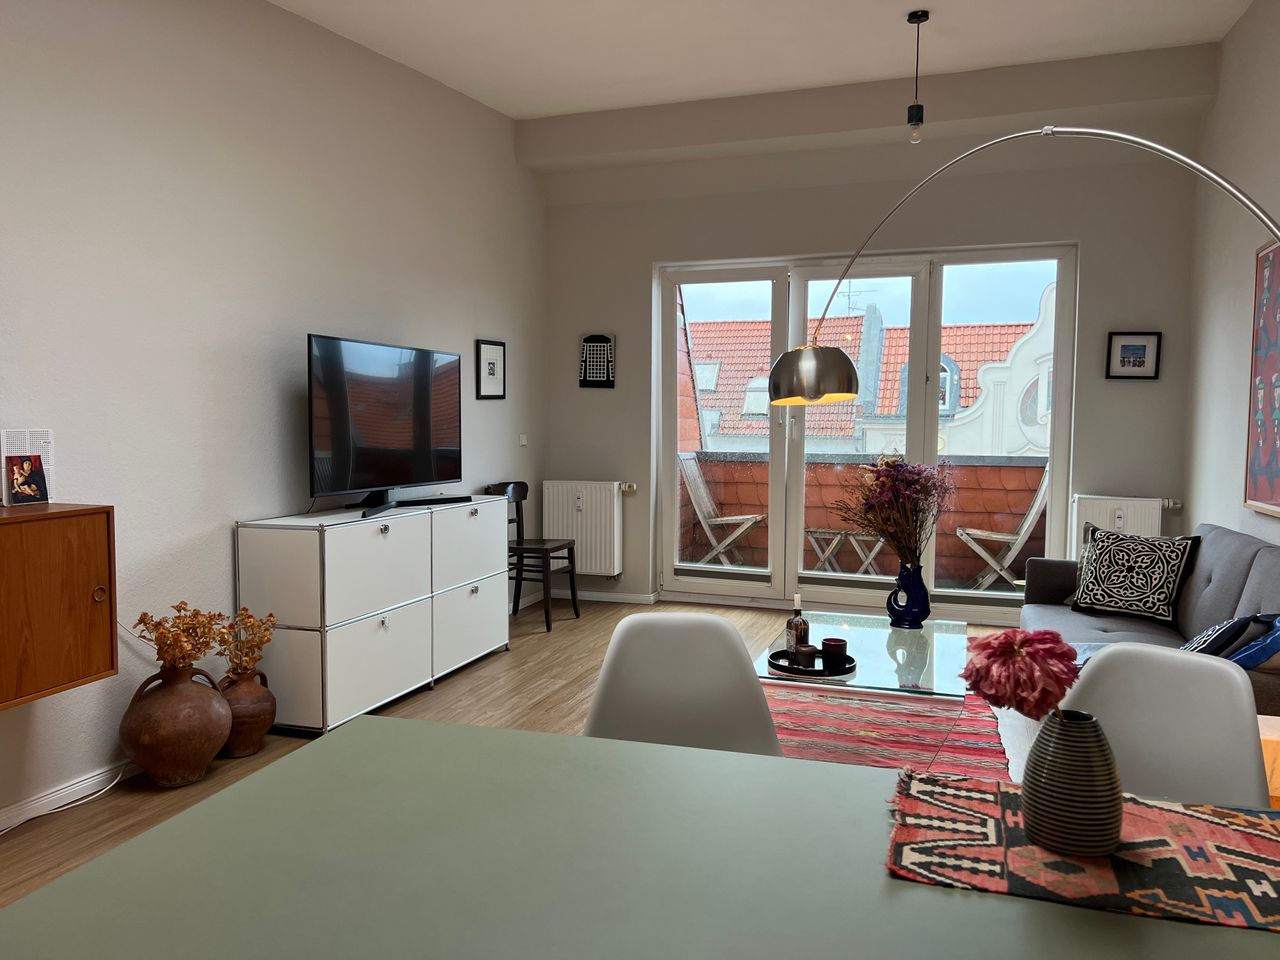 Stylish and cozy flat with balcony and wonderful city view, excellent location, quiet and bright. Prenzlauer Berg